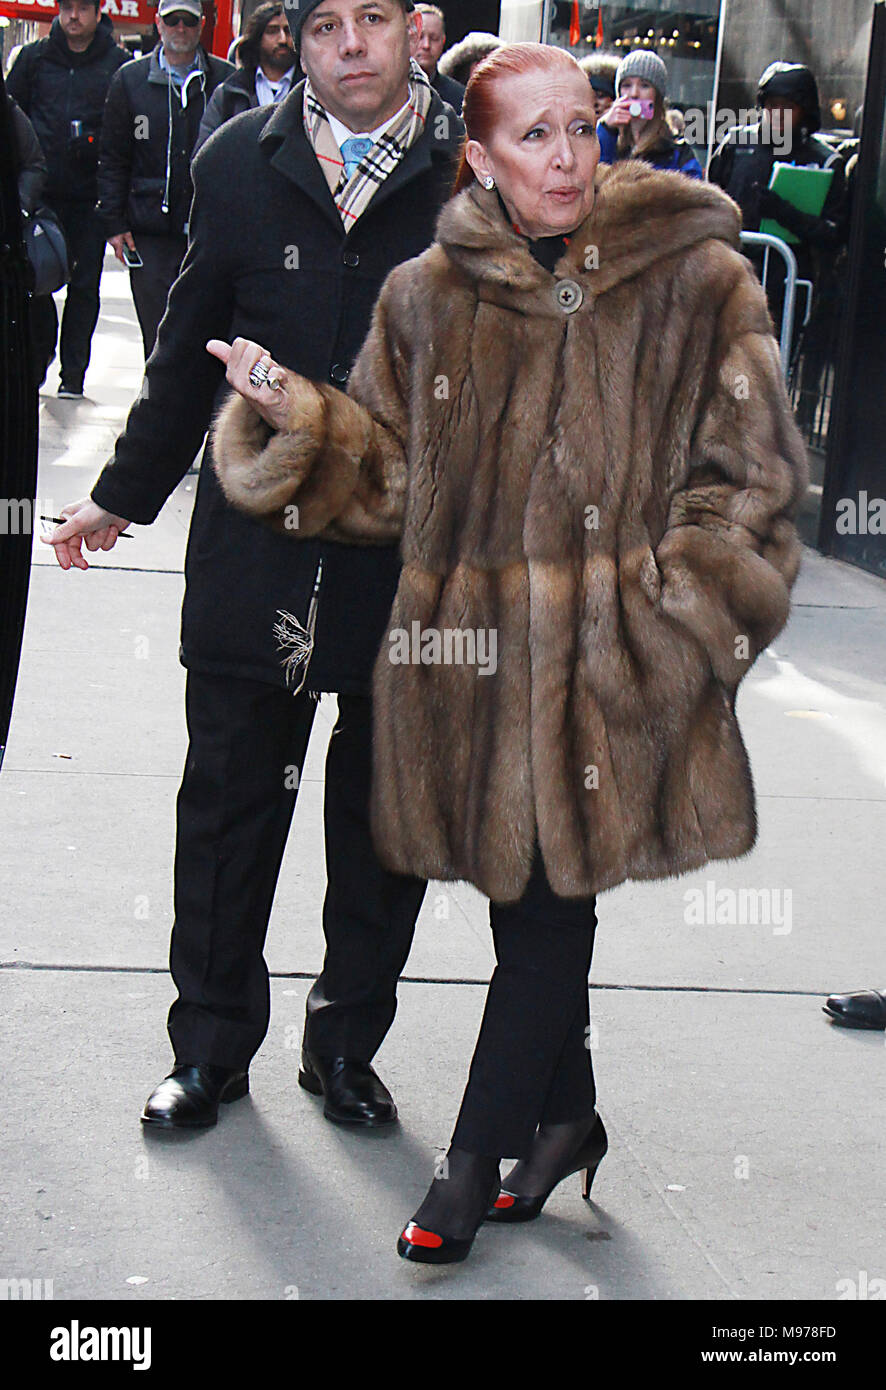 New York, NY, USA. 23rd Mar, 2018. Danielle Steel seen after an appearance on Good Morning America promoting her new book Accidental Heroes on March 23, 2018 in New York City. Credit: Rw/Media Punch/Alamy Live News Stock Photo